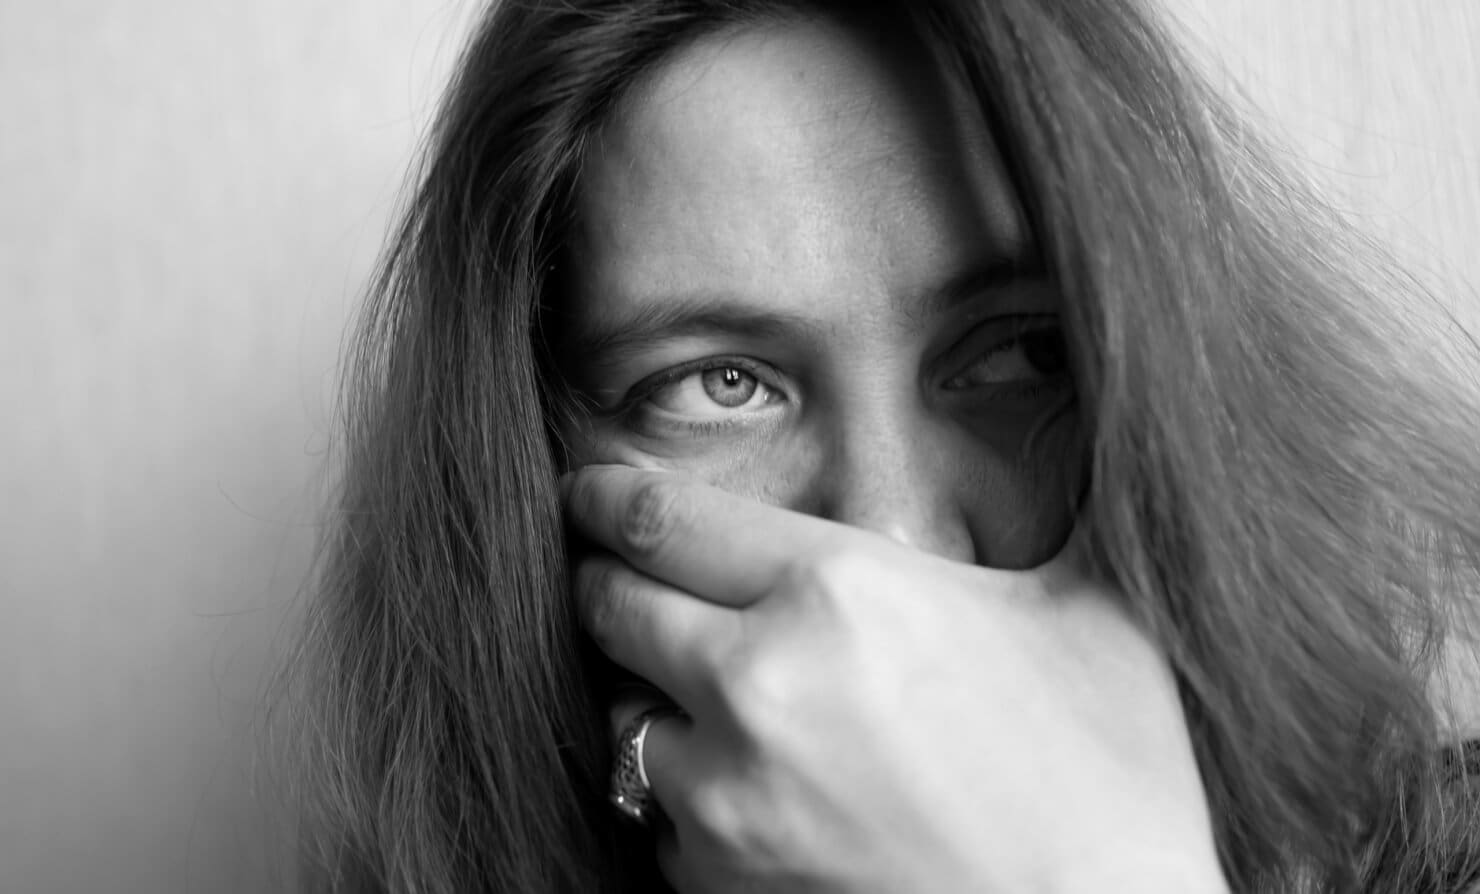 A black and white photo of a woman in rehab covering her face.